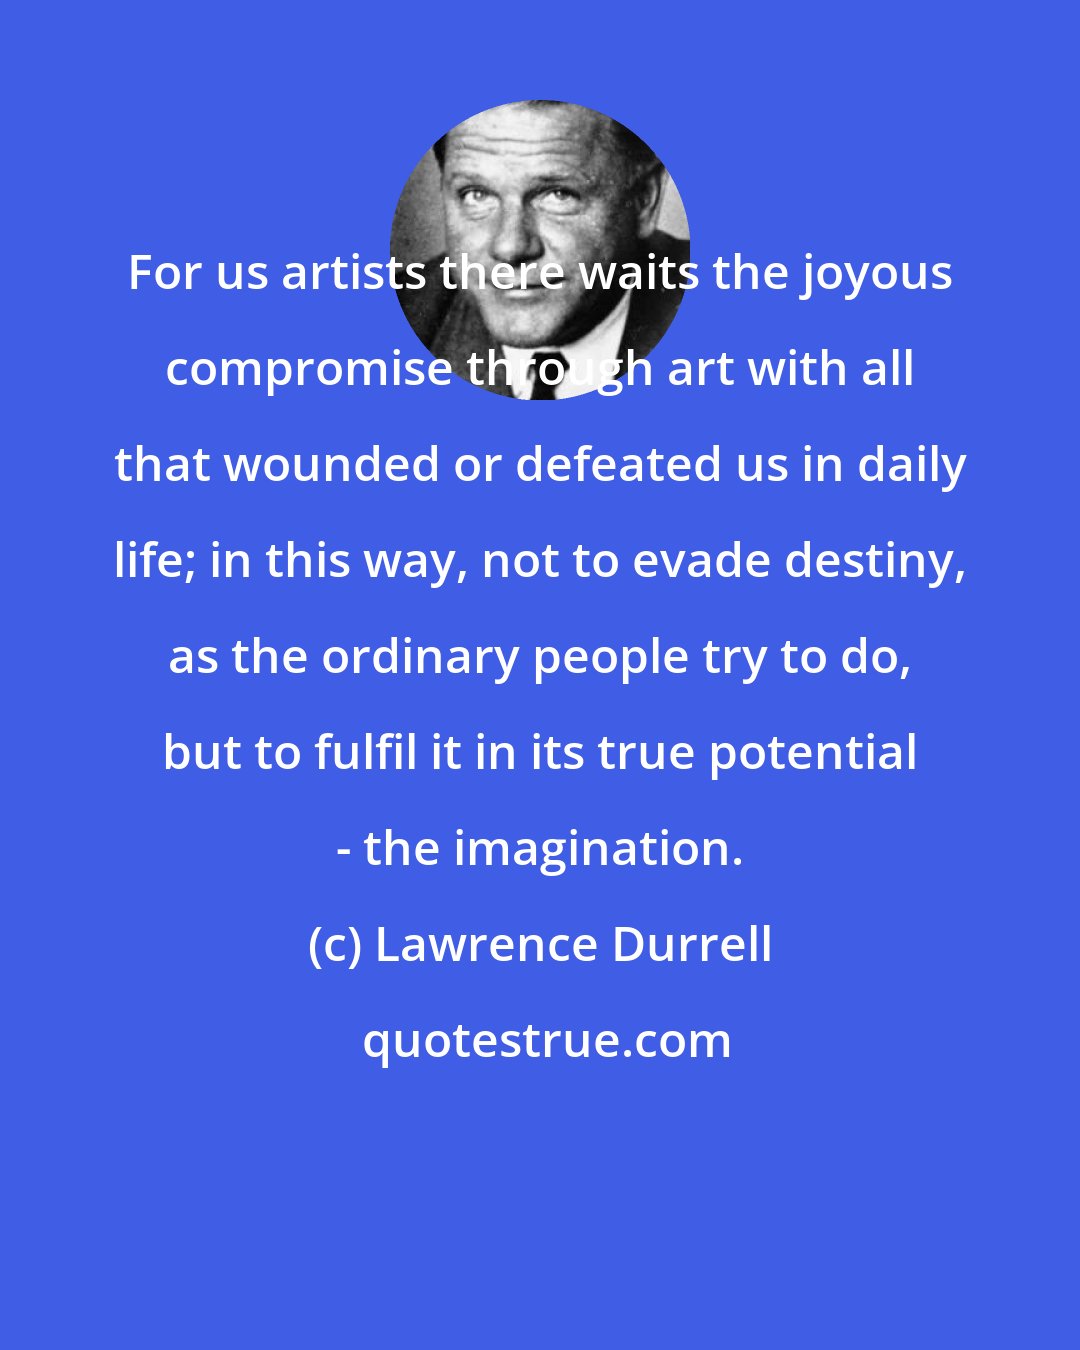 Lawrence Durrell: For us artists there waits the joyous compromise through art with all that wounded or defeated us in daily life; in this way, not to evade destiny, as the ordinary people try to do, but to fulfil it in its true potential - the imagination.